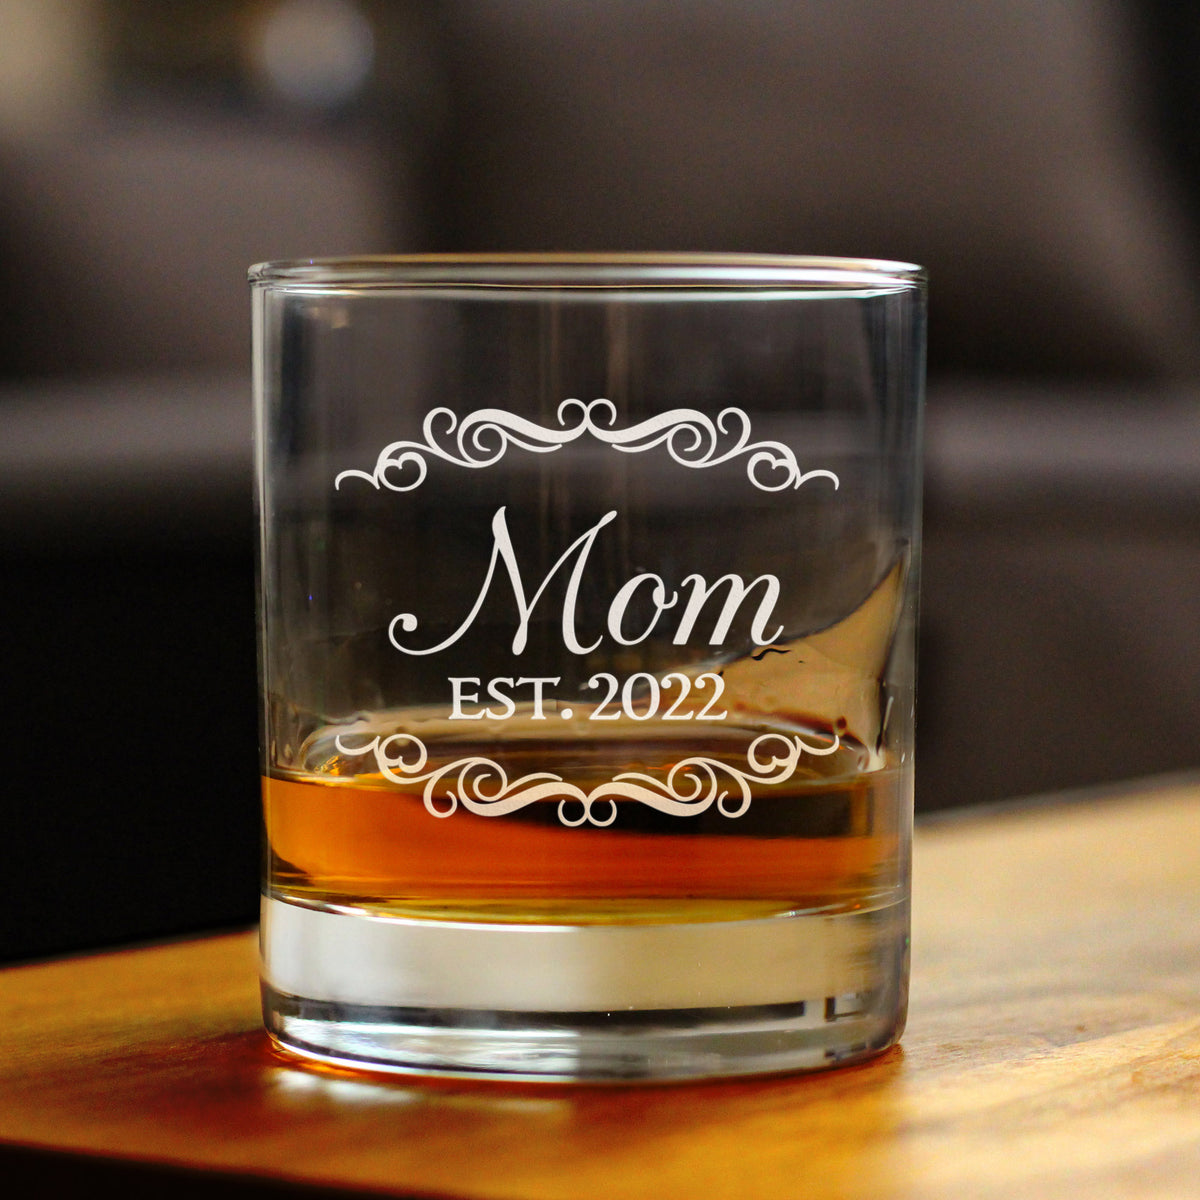 Mom Est 2022 - New Mother Whiskey Rocks Glass Gift for First Time Parents - Decorative 10.25 Oz Glasses